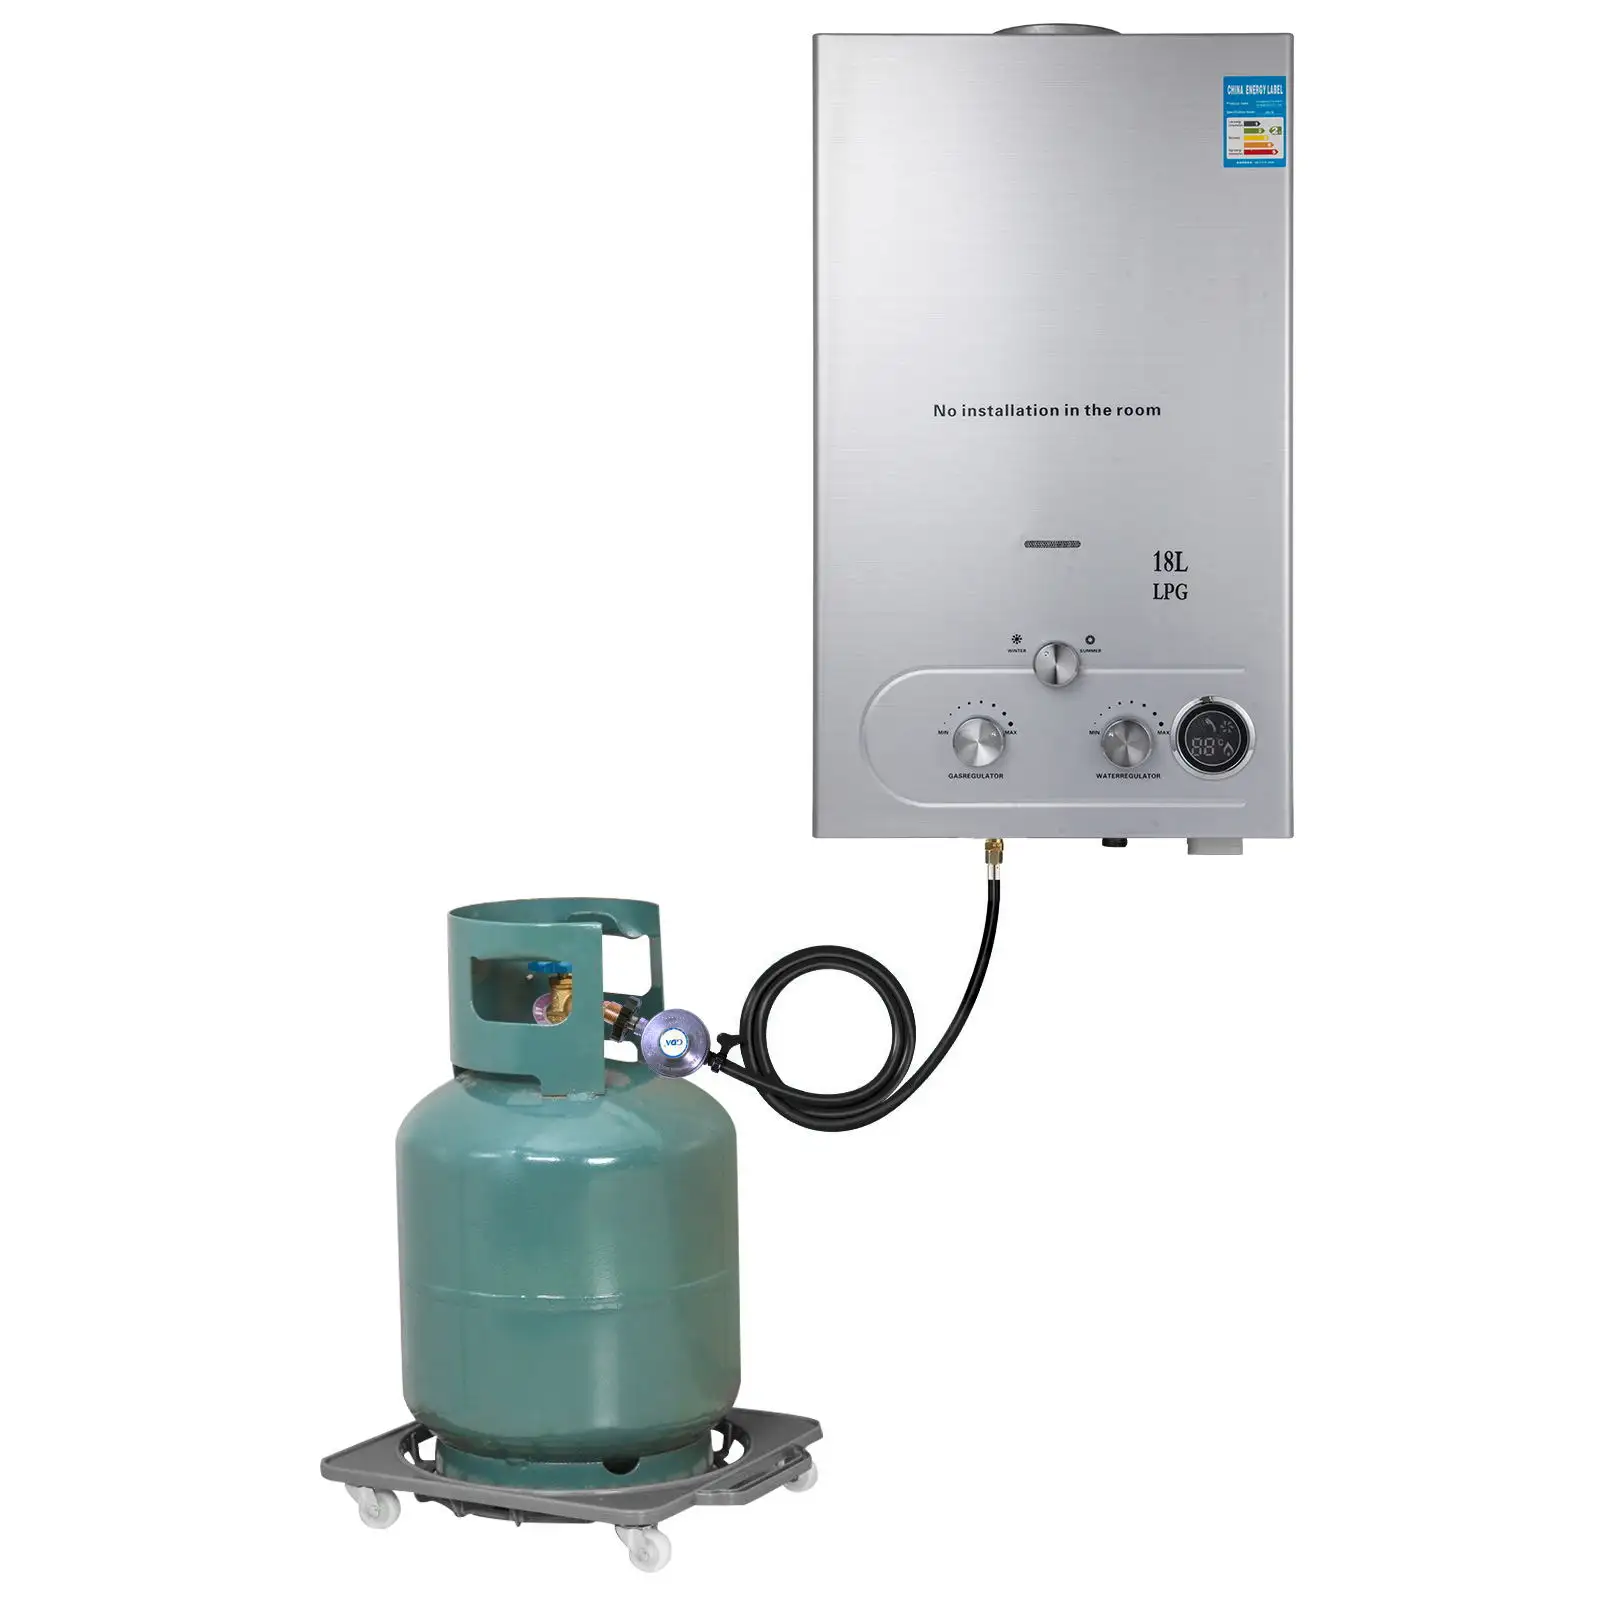 At A Loss gas water heater household instant water heaters